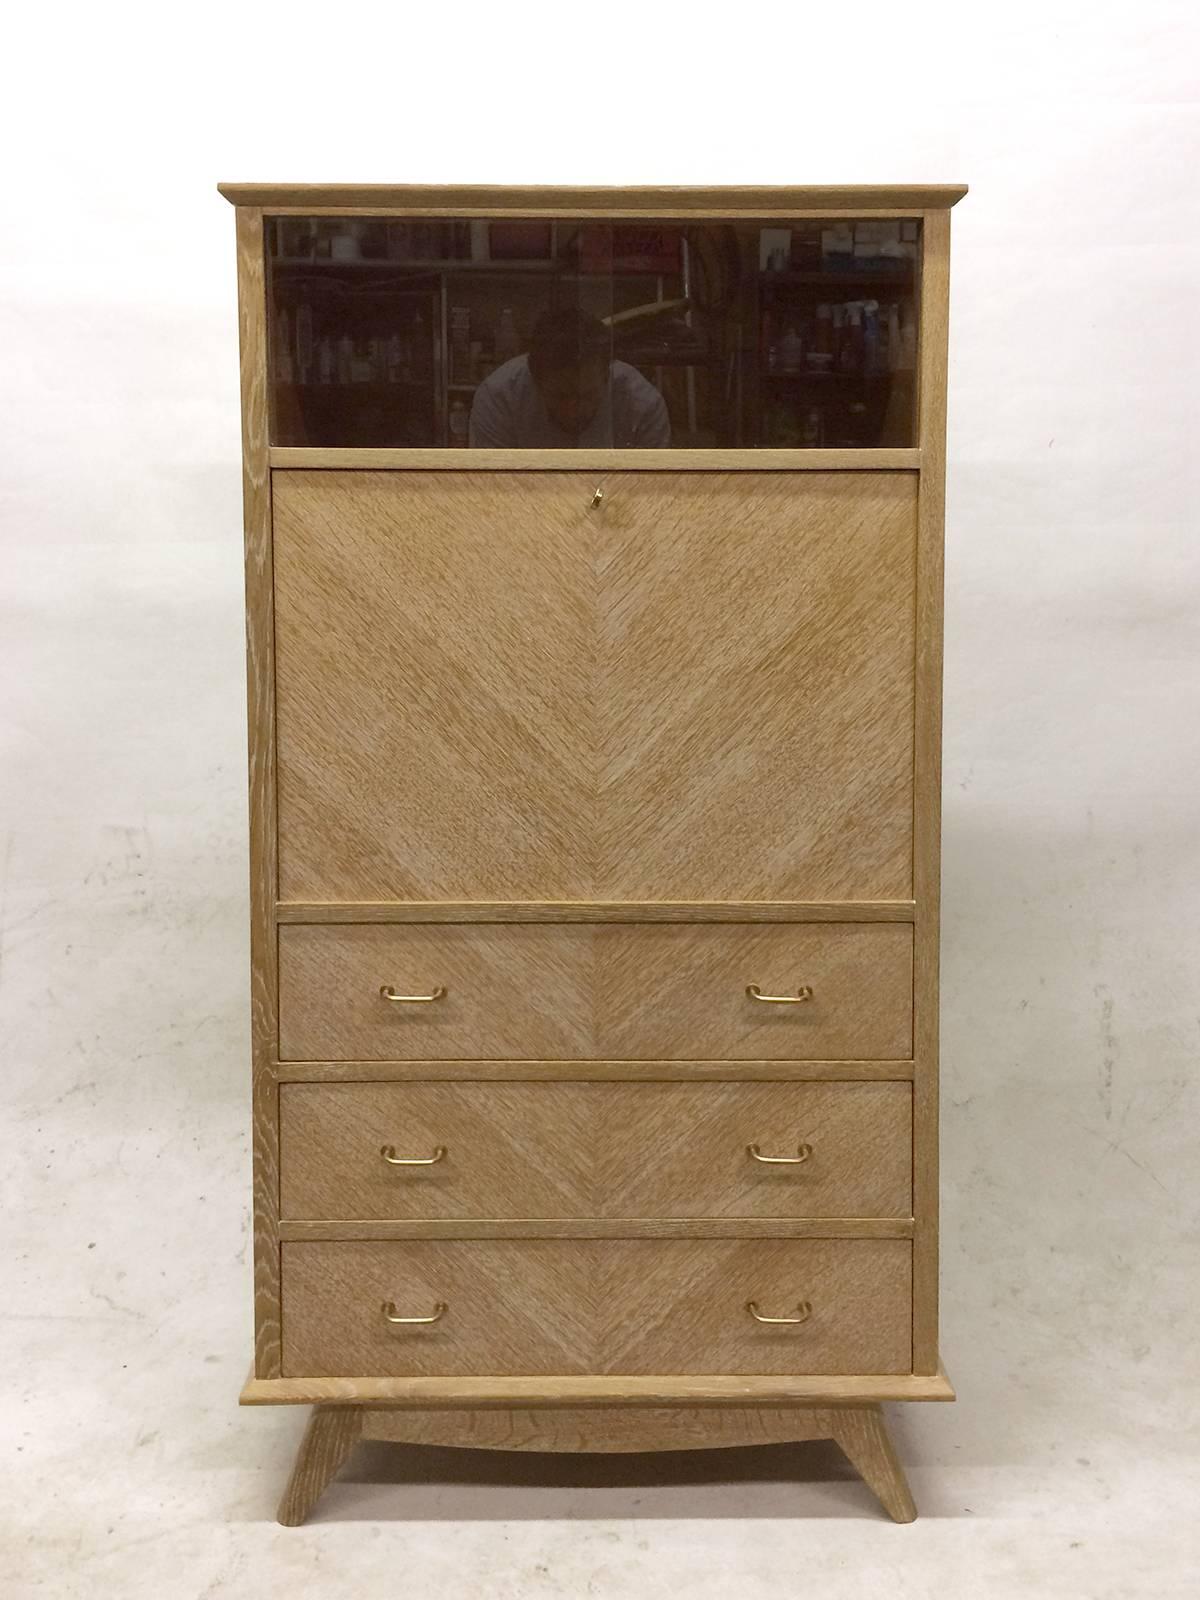 This Mid-Century secretaire is finished with bookmatched oak, brass fittings, and a light ceruse finish. The top section has sliding glass doors, the middle opens and has two drawers and one adjustable shelf and the bottom section has three drawers